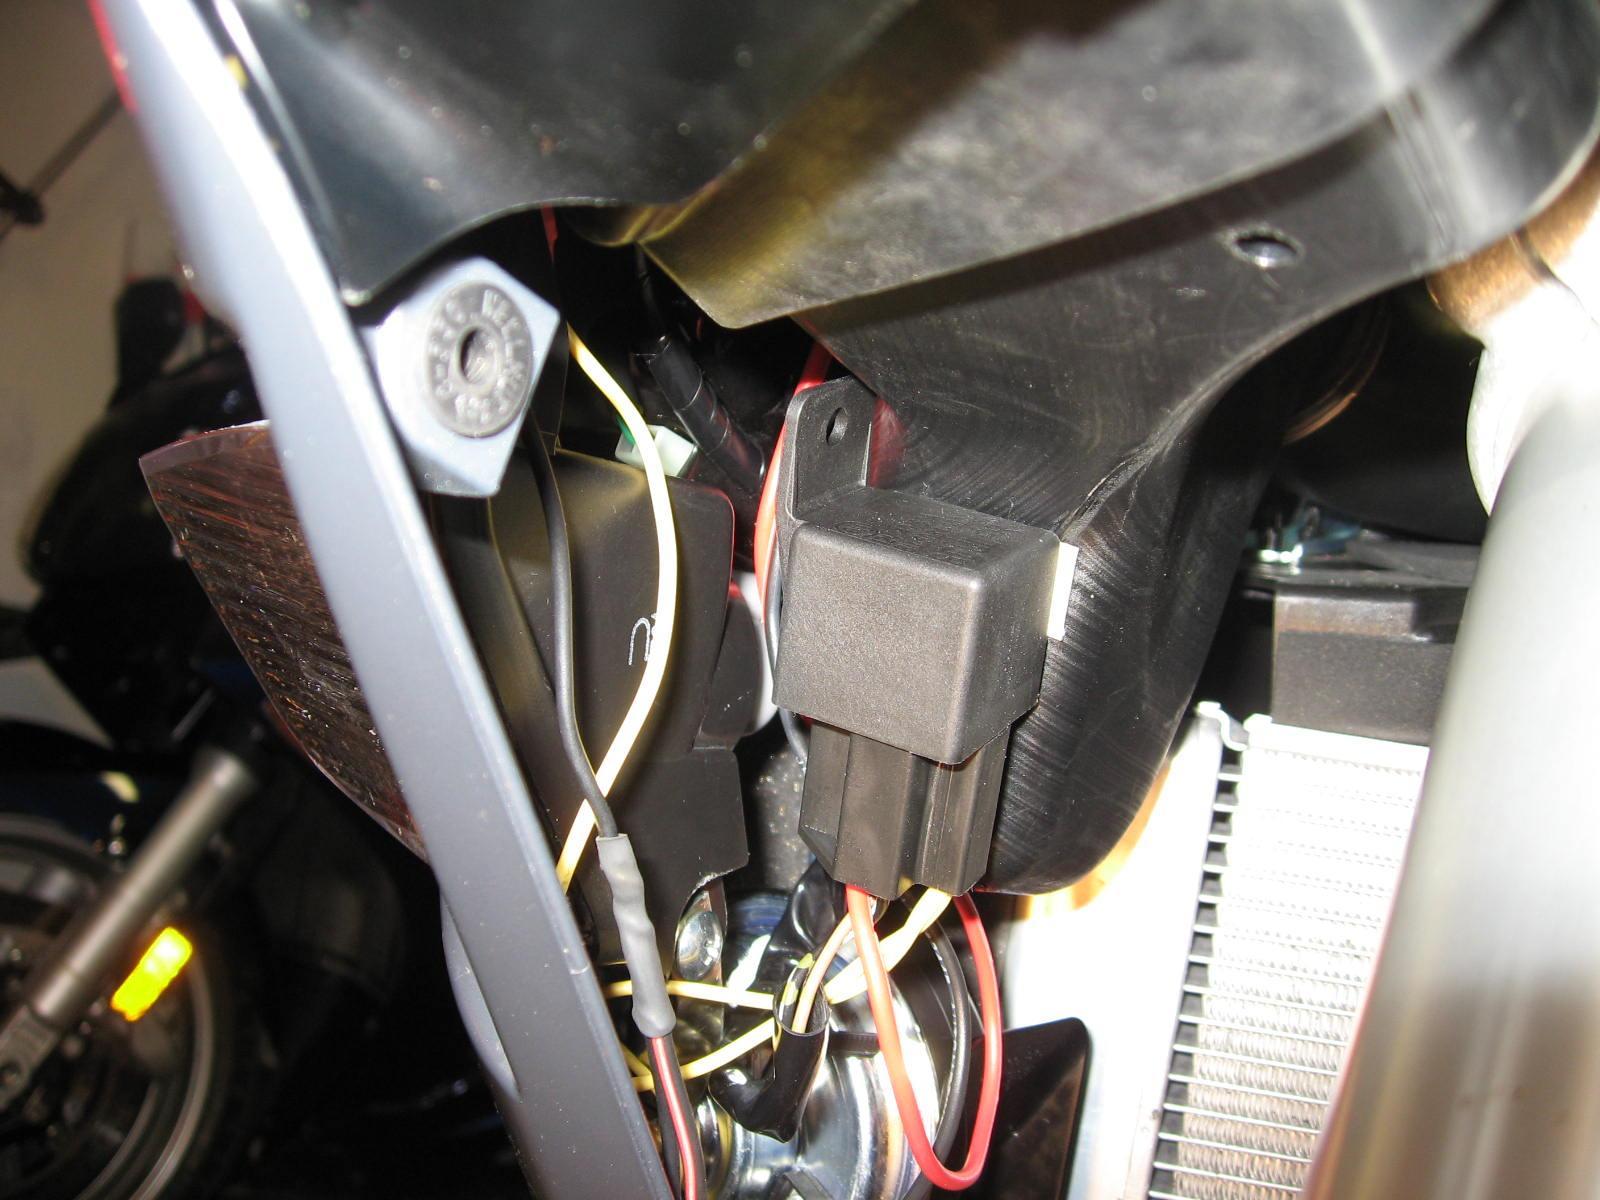 Horn relay mounted to air intake plenum